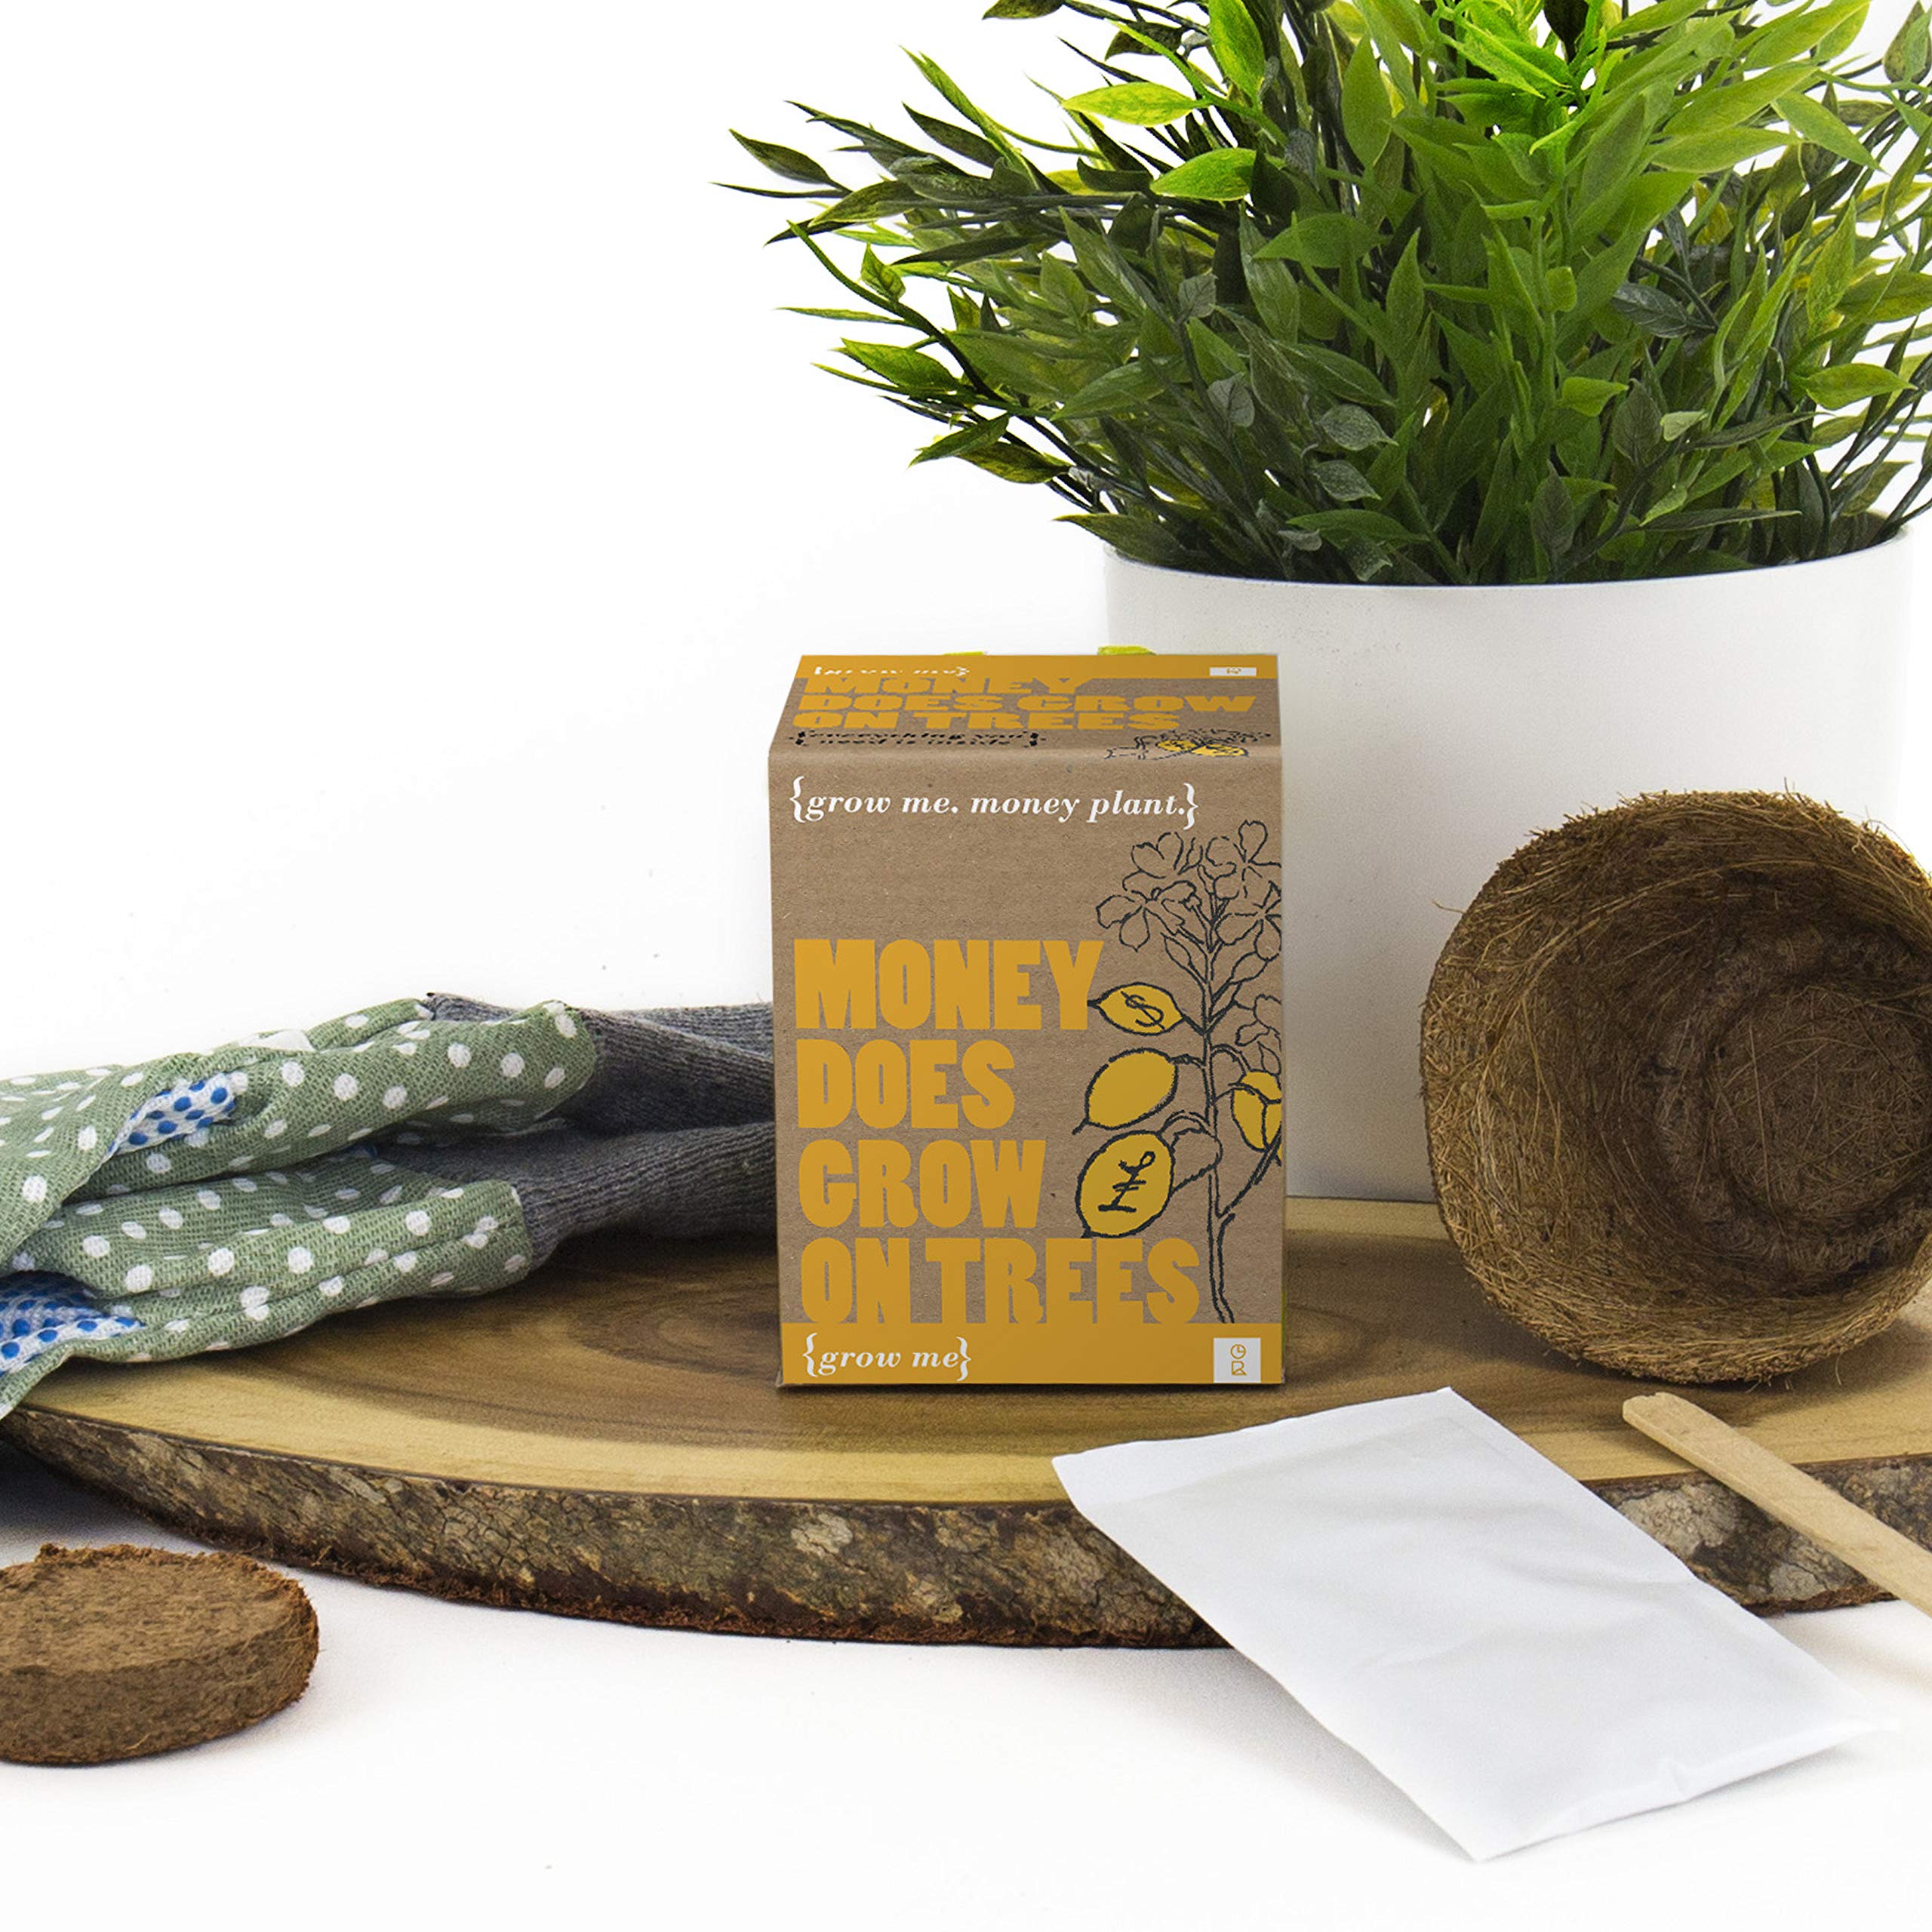 Money-Related Puns and Jokes As Funny Money Gift Ideas 